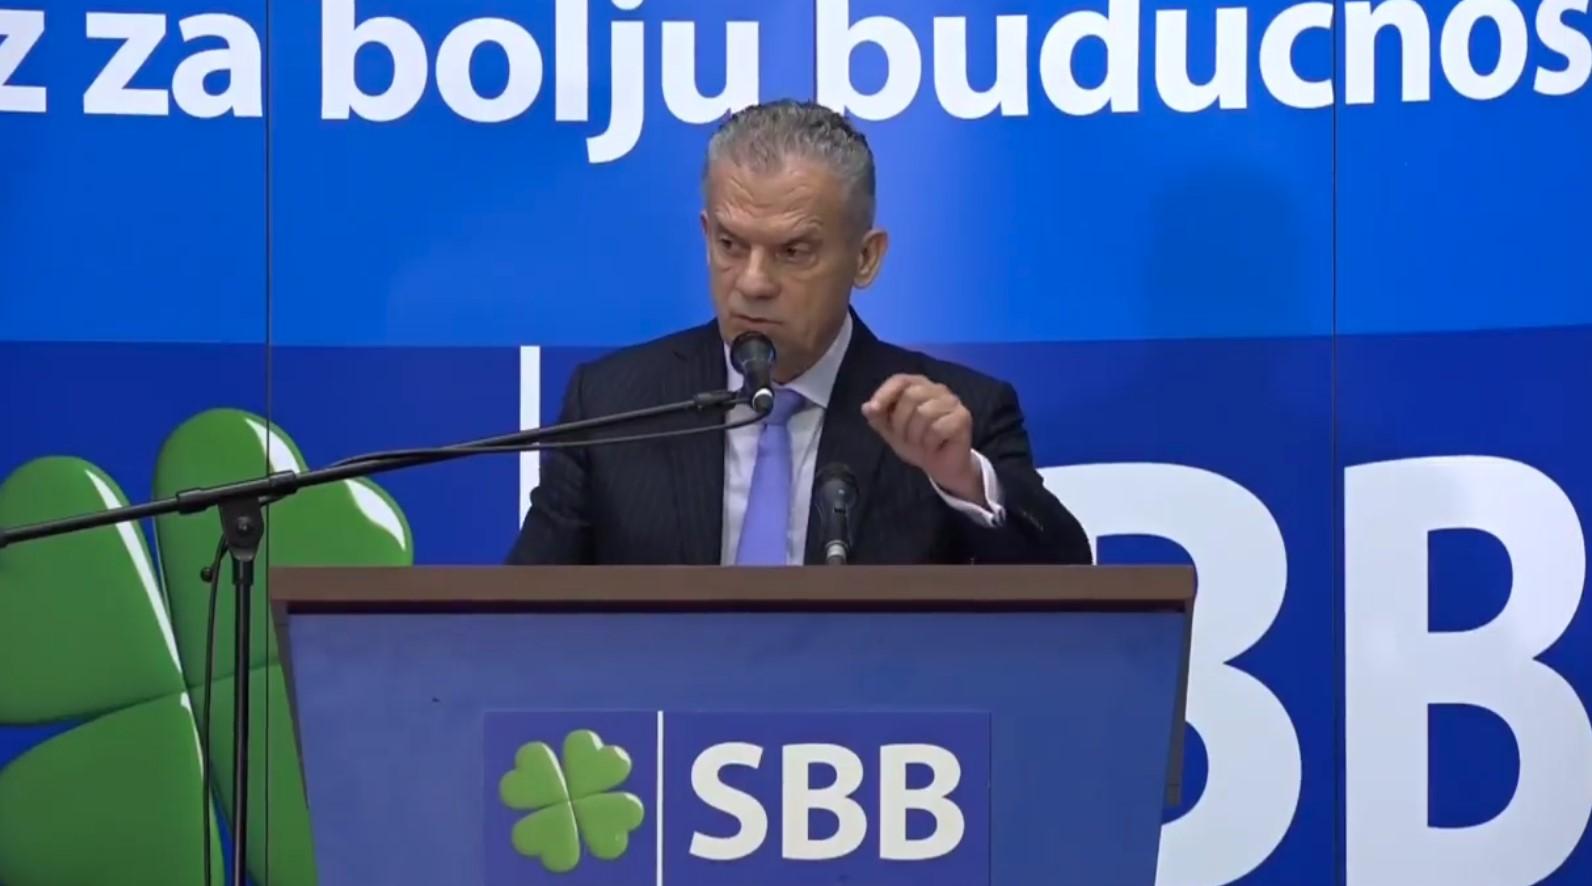 Radončić: We demand that Fadil Novalić urgently takes a billion marks from his budget straw bag and passes it on to the people and the economy